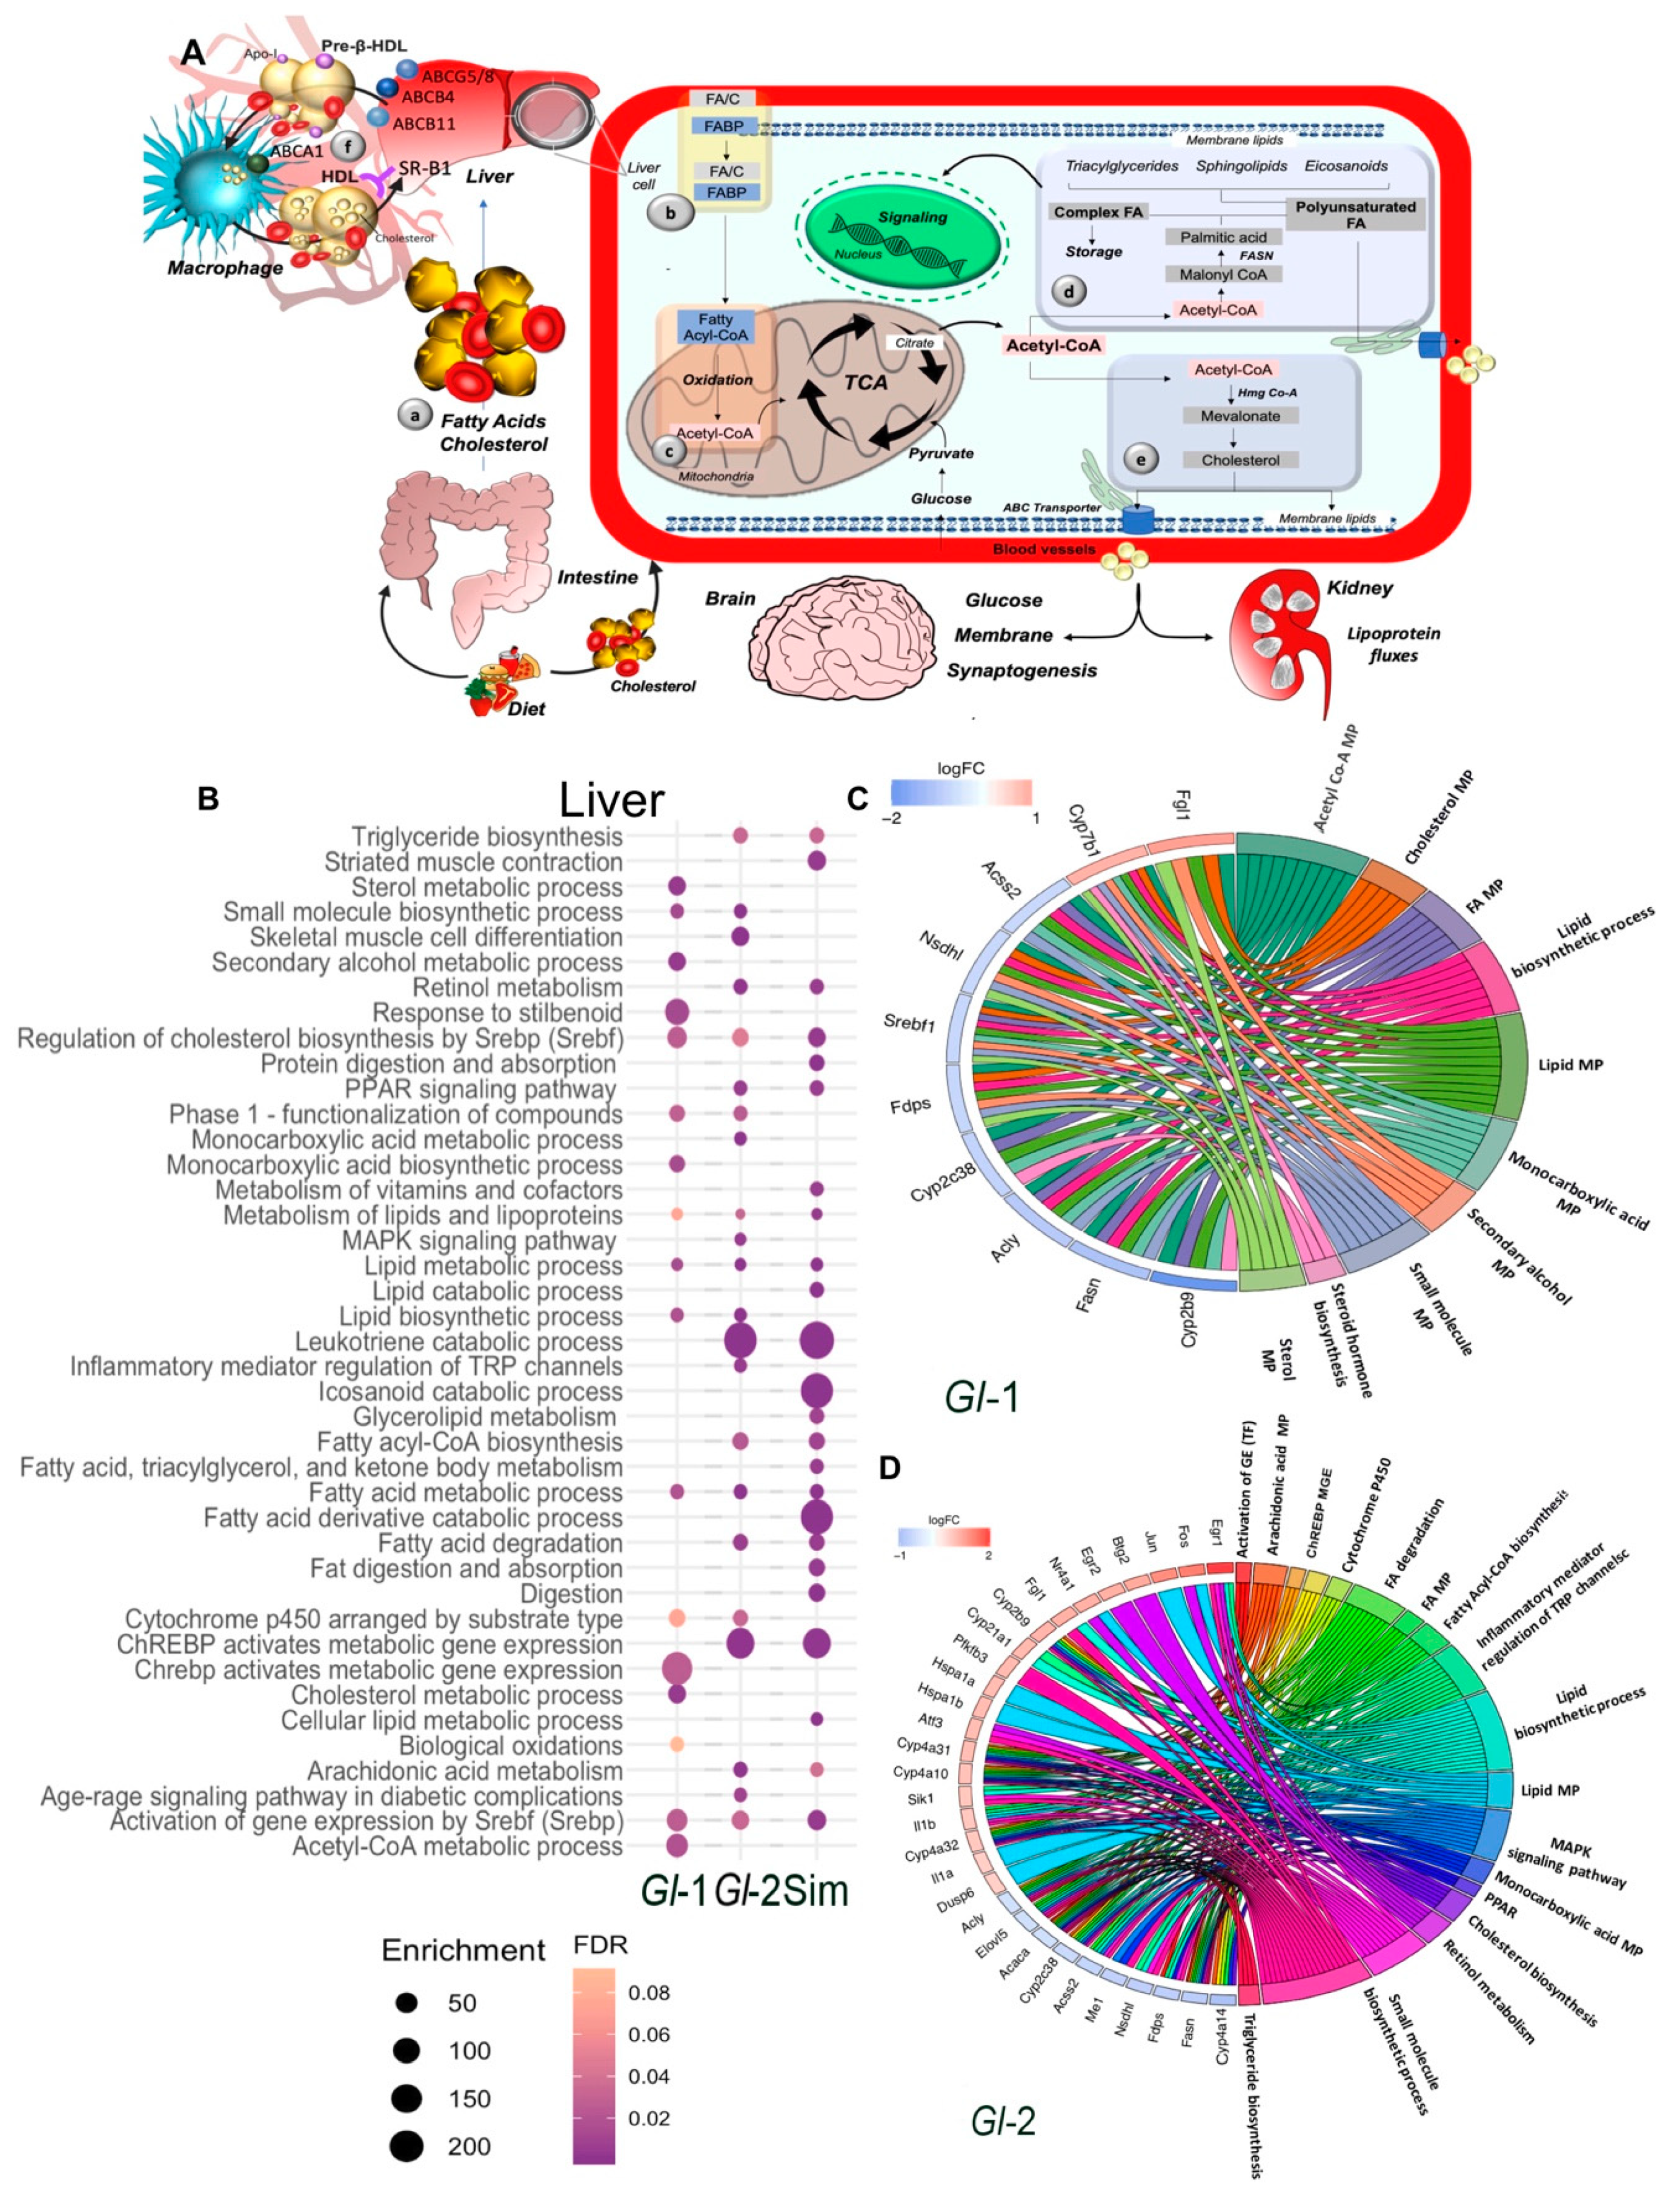 Nutrients | Free Full-Text | Mexican Ganoderma Lucidum Extracts Decrease  Lipogenesis Modulating Transcriptional Metabolic Networks and Gut  Microbiota in C57BL/6 Mice Fed with a High-Cholesterol Diet